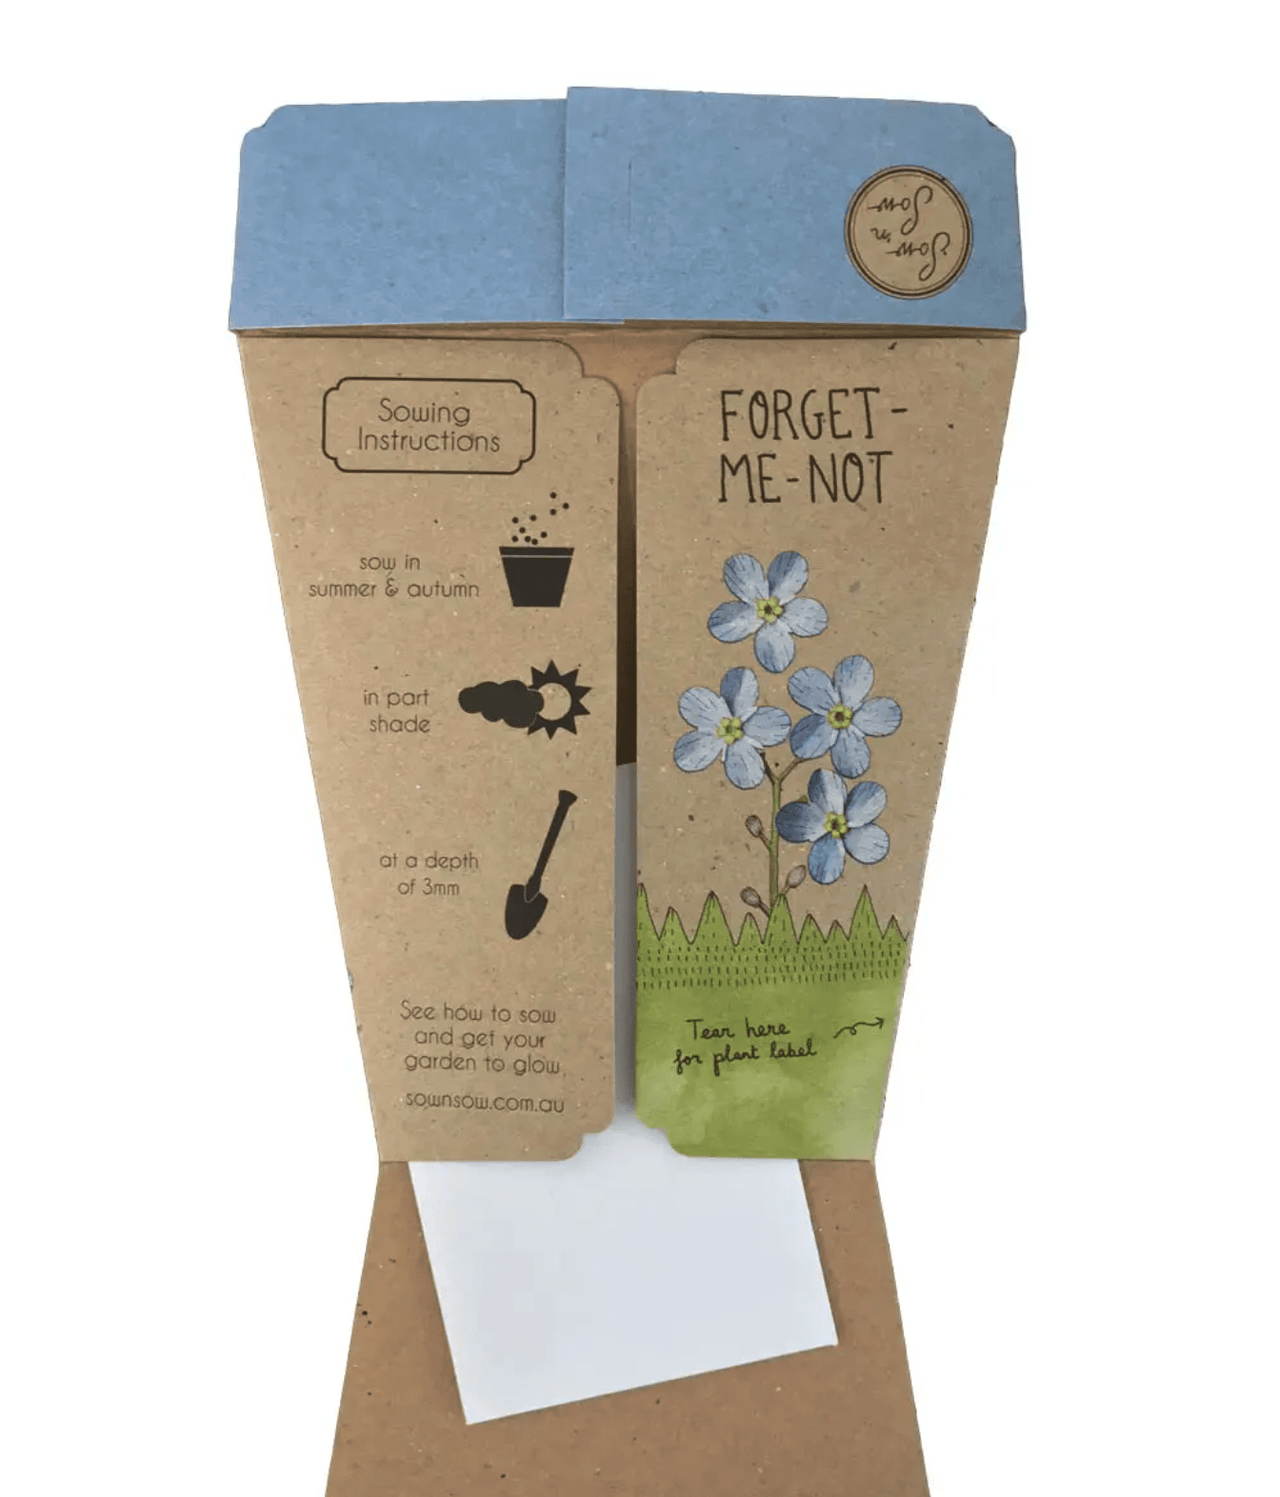 A box with Seeds - Forget-me-not from Sow n Sow in it and a note on it.